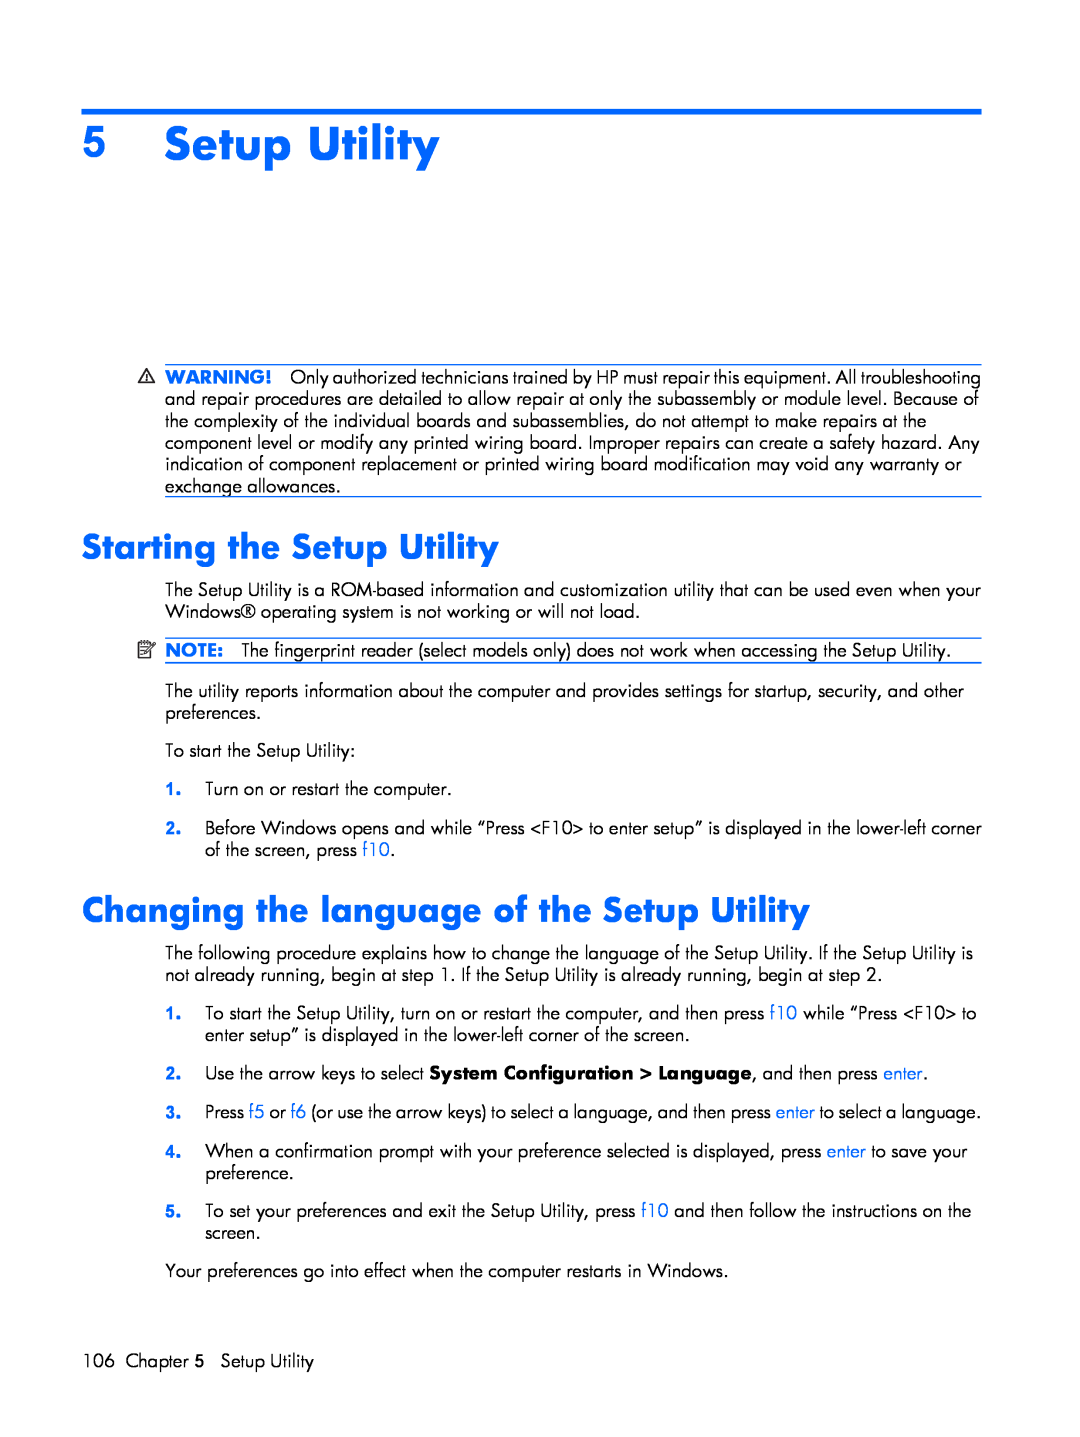 HP V3672TU, V3523TU, V3930TU, V3931TU, V3929TU Starting the Setup Utility, Changing the language of the Setup Utility 